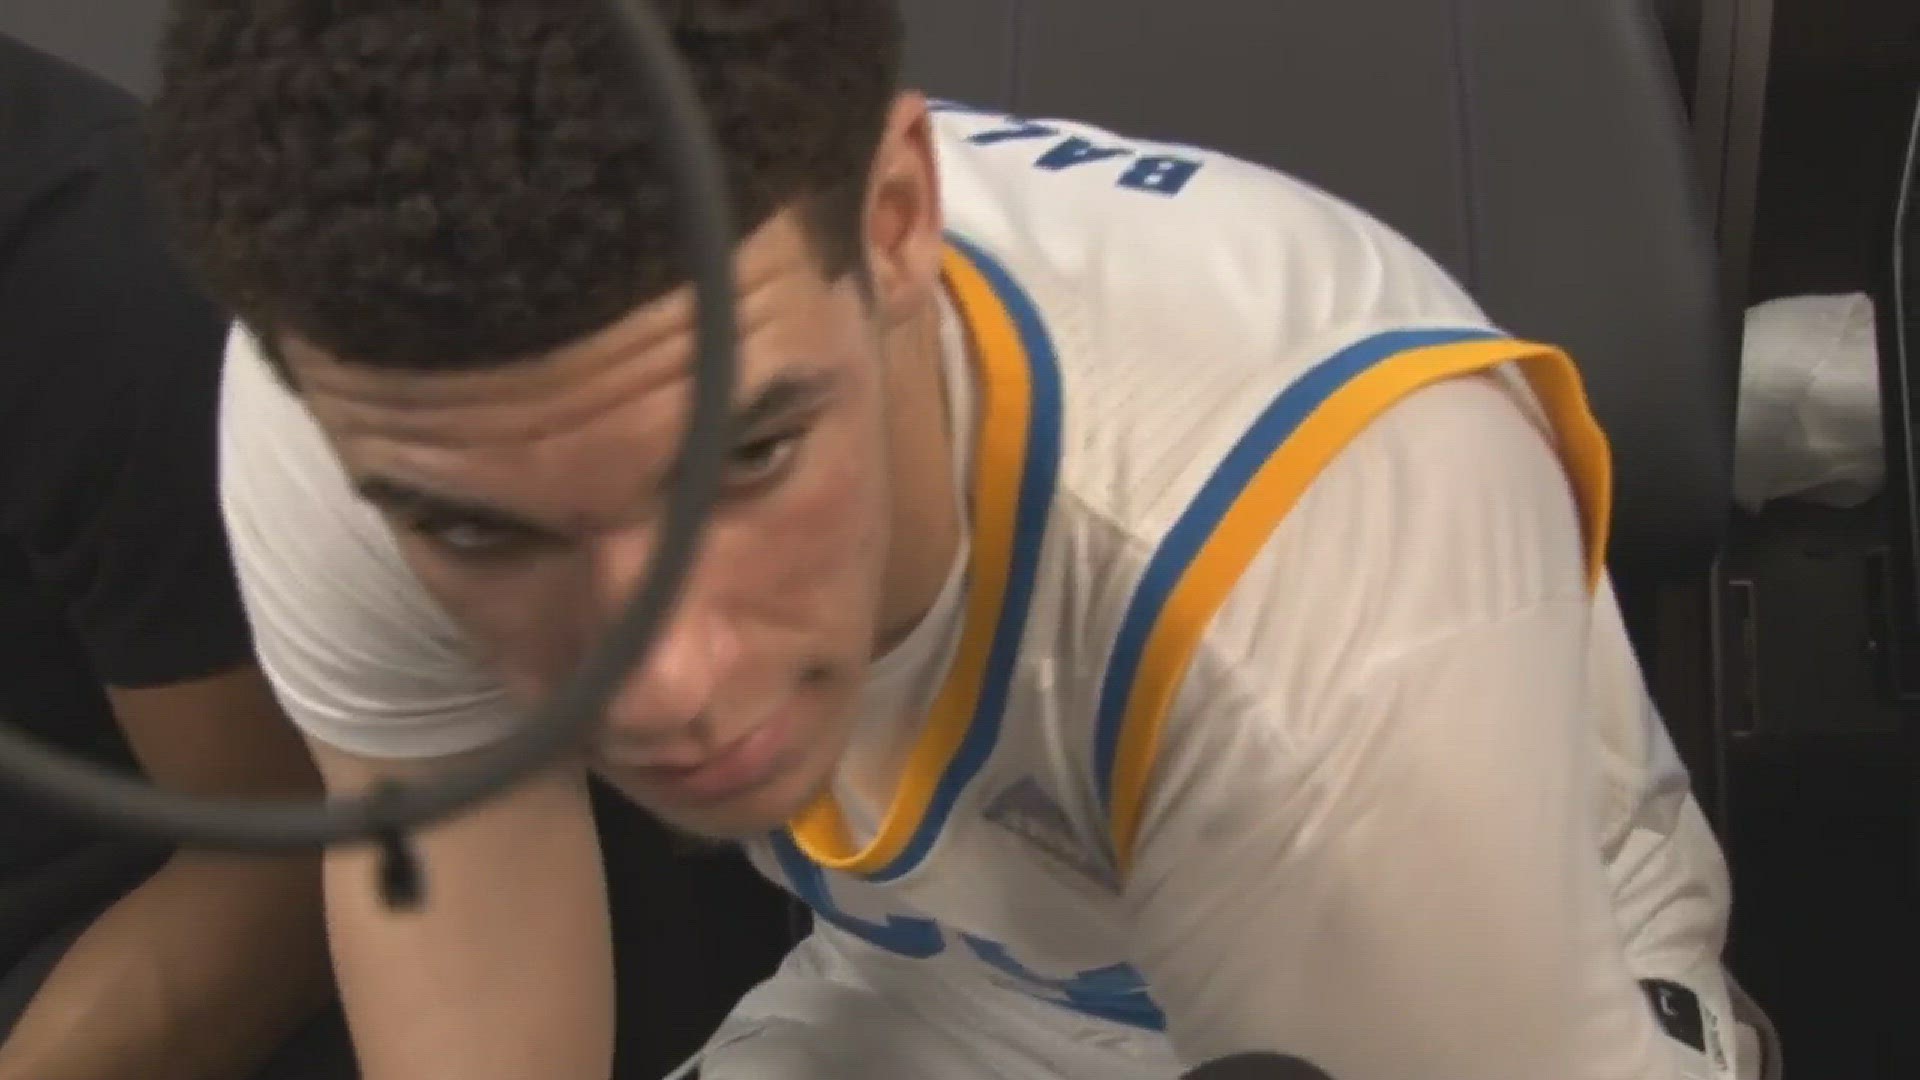 UCLA guard Lonzo Ball, one of the nation's top collegiate athletes, talks about Friday's win over Kent State in the first round of the NCAA Tournament and how he's feeling after he suffered a hard fall in the first half.